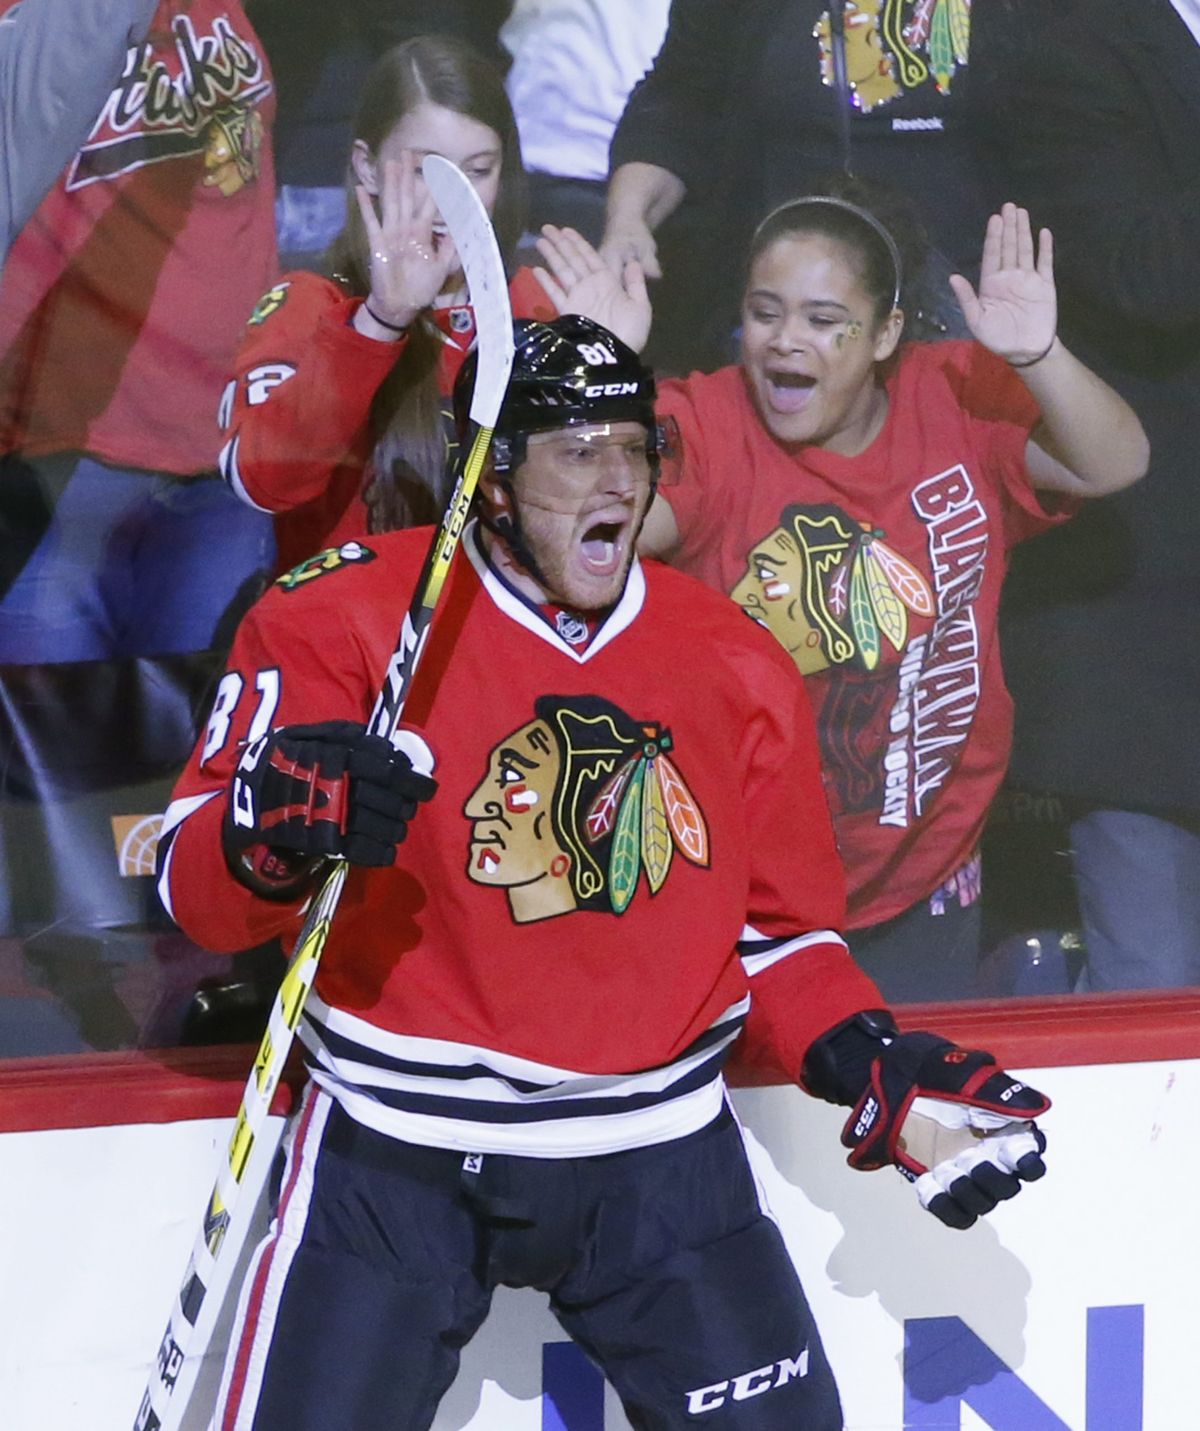 Marian Hossa to Be Inducted into Hockey Hall of Fame